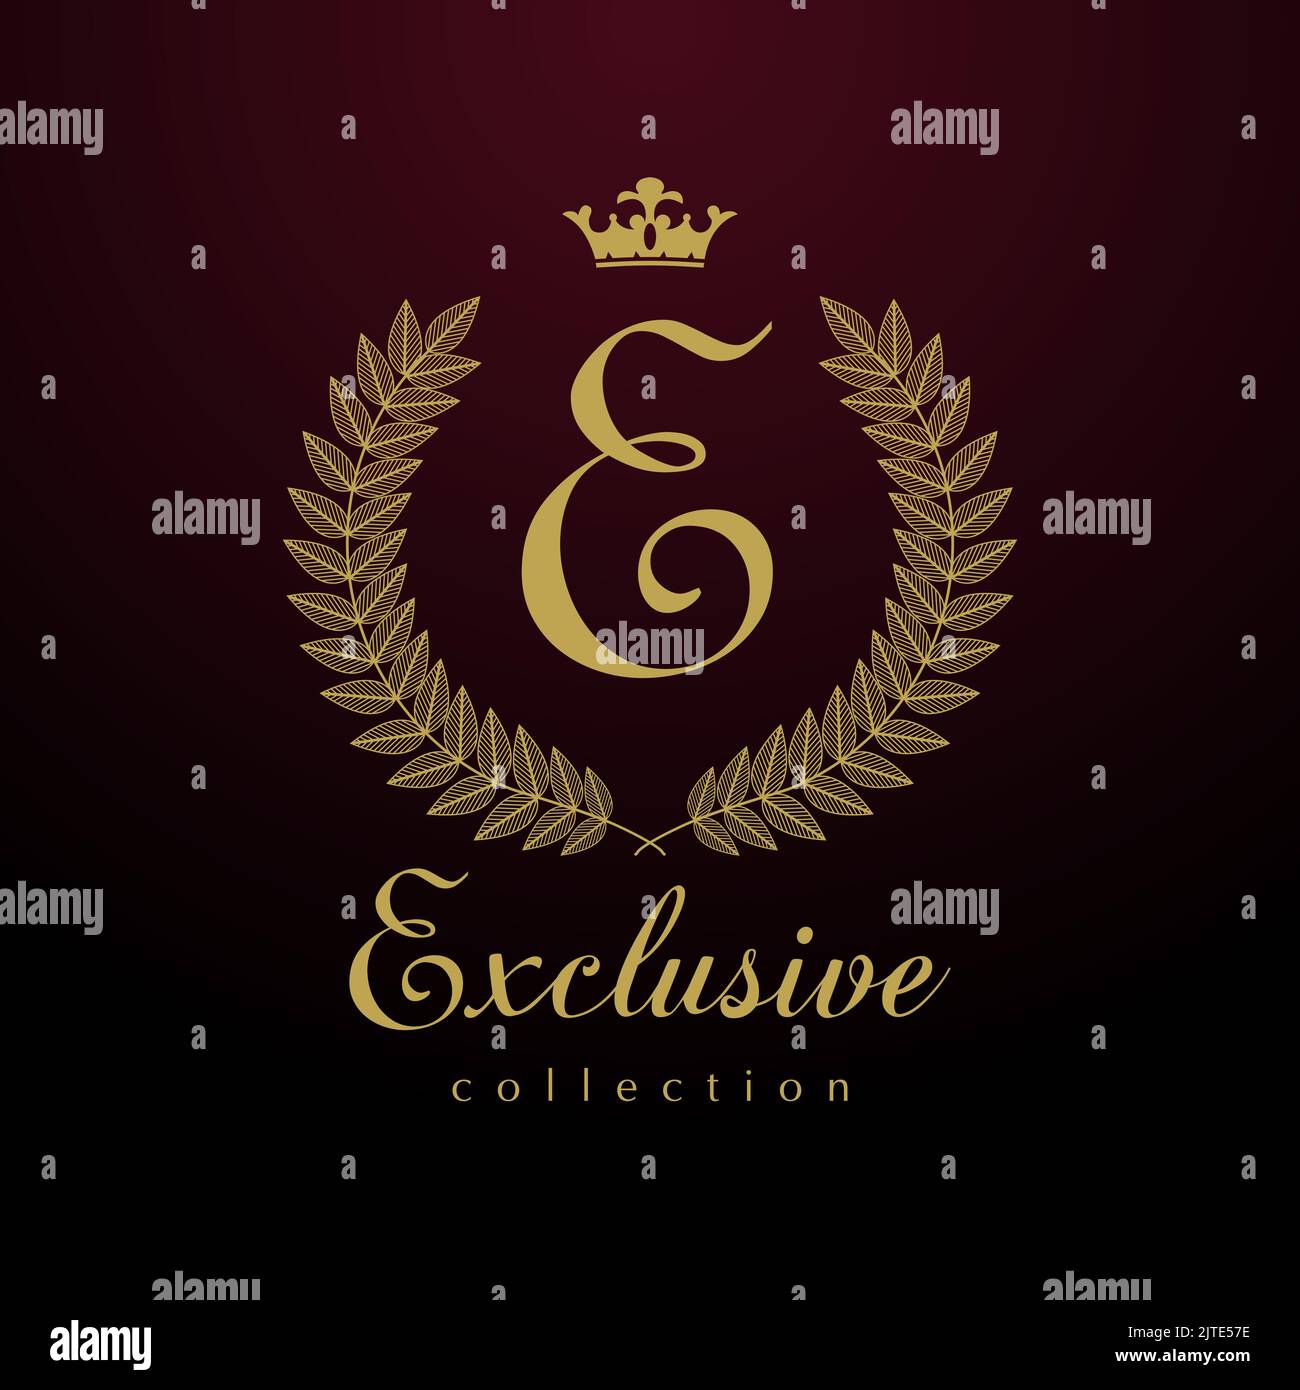 Exclusive collection vintage sign with old style letter E. Fashion collection logo concept with round palm wreath. Isolated abstract graphic design. Stock Vector